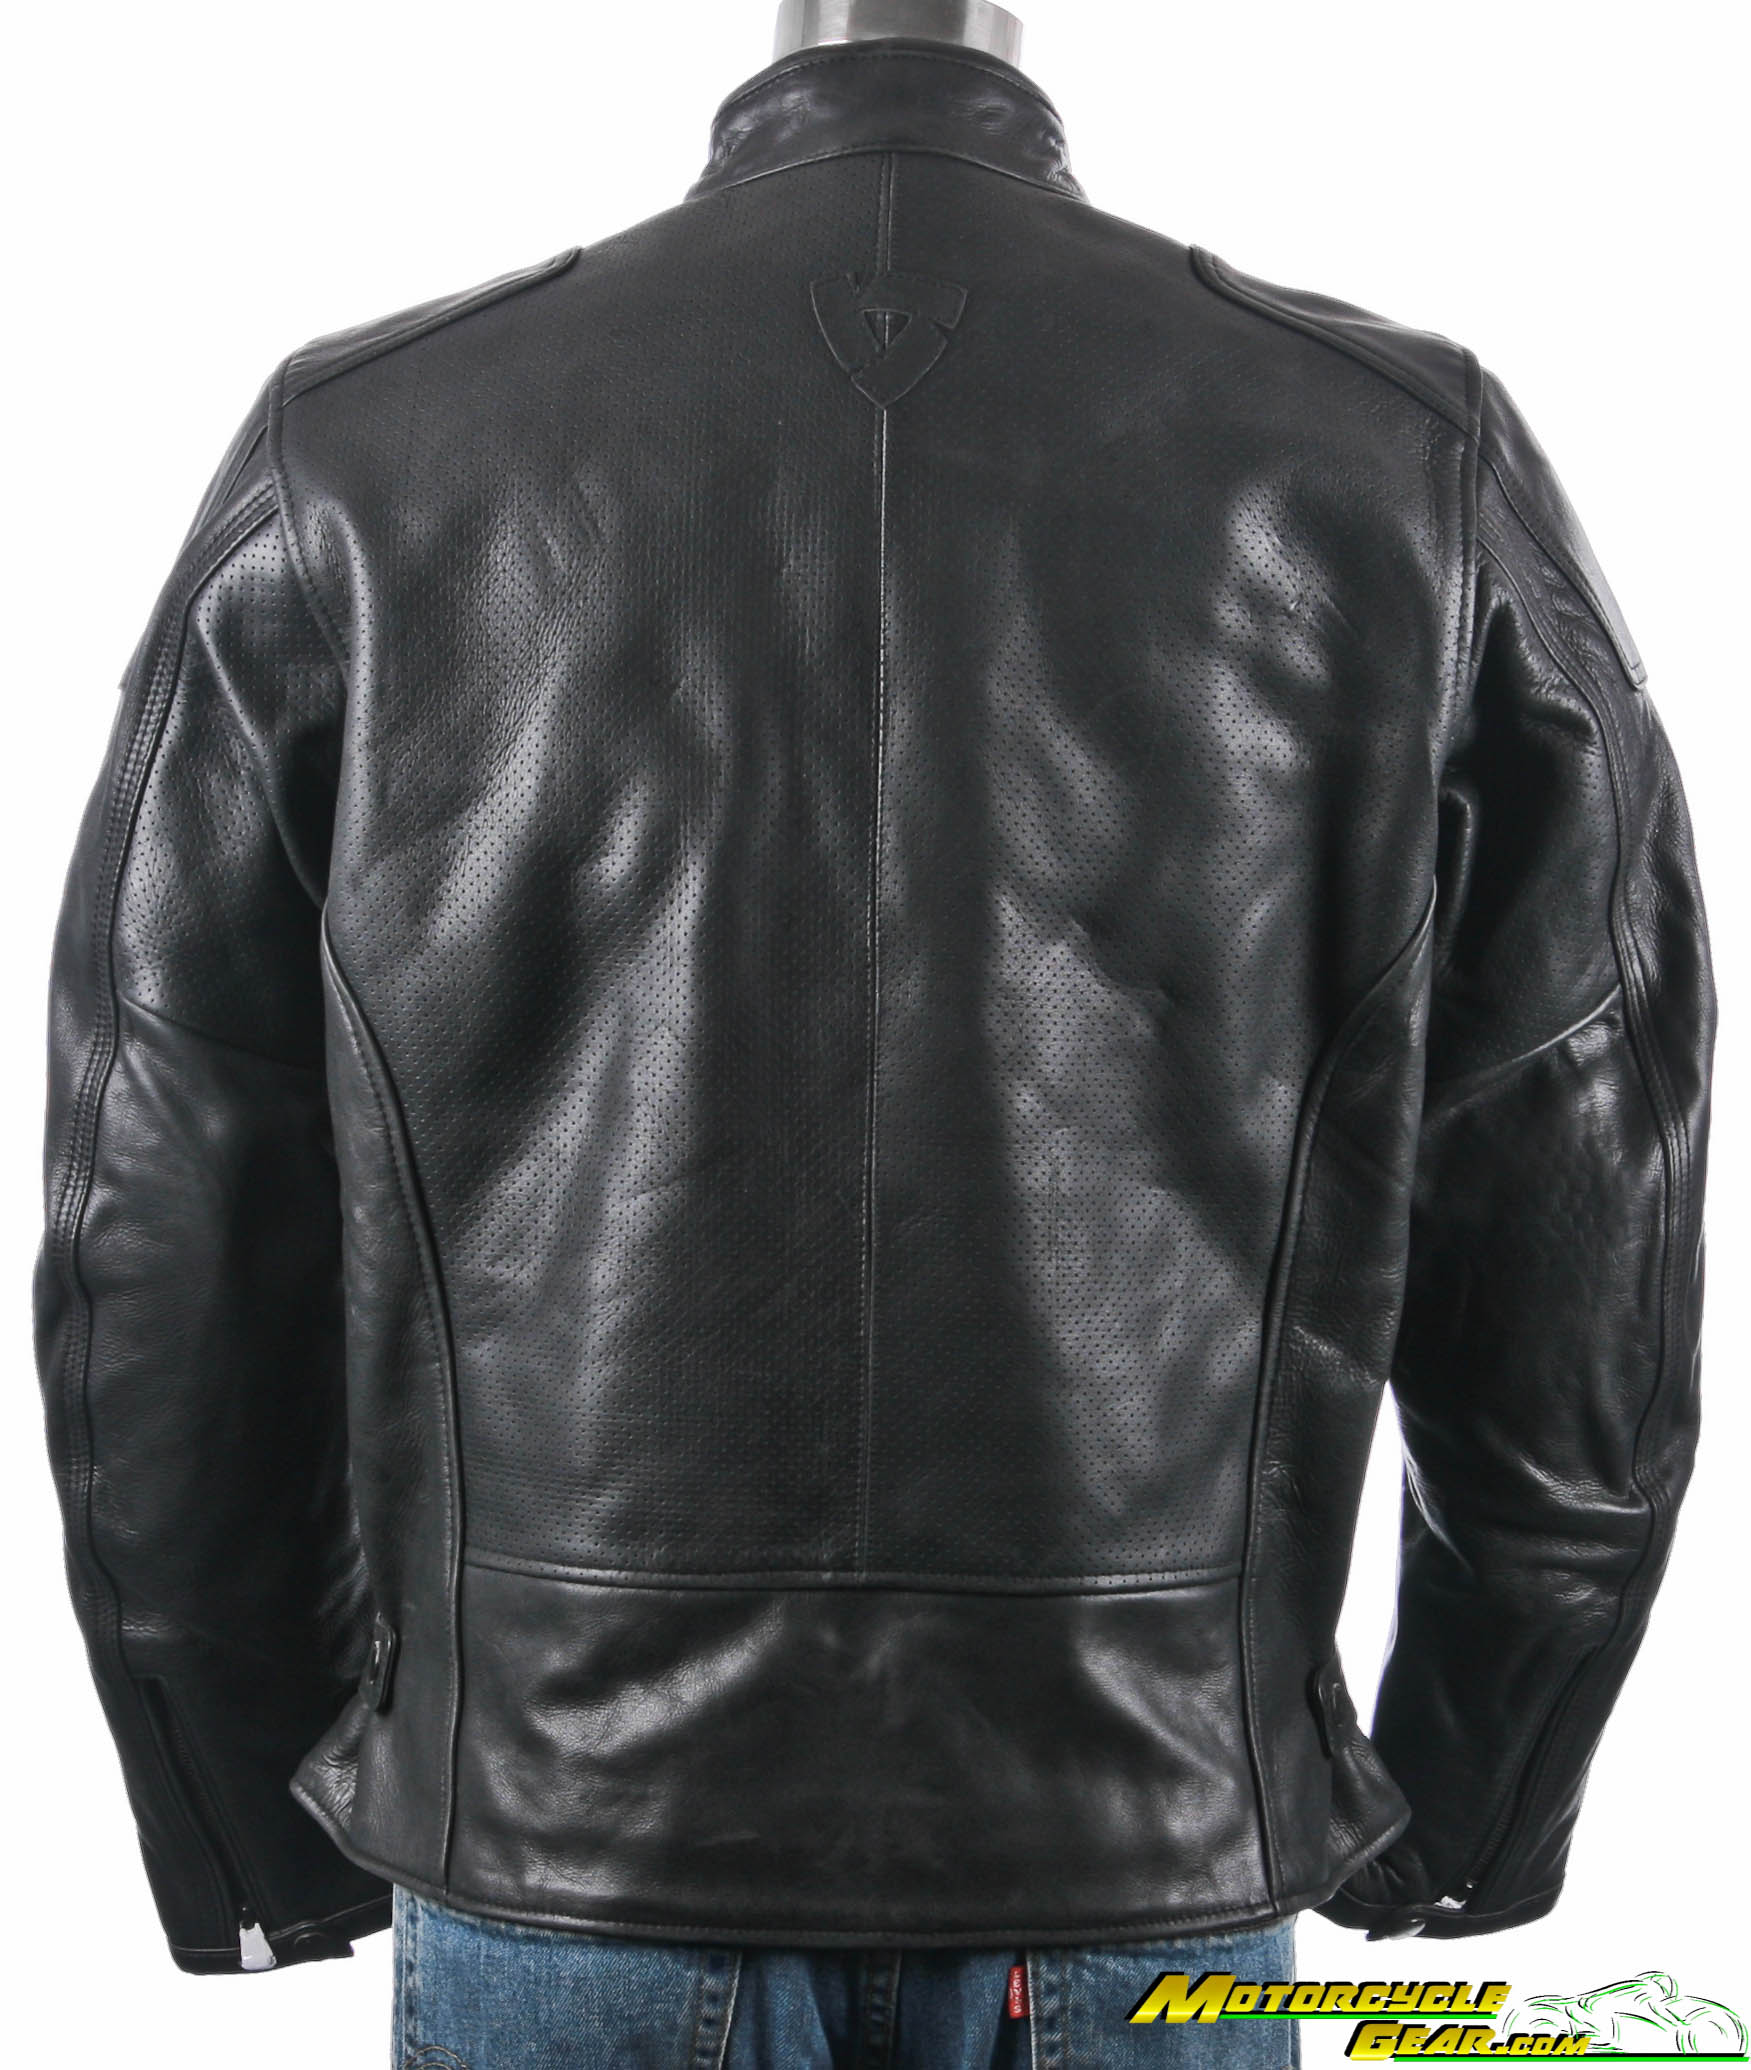 Viewing Images For REV'IT! Sherwood Air Jacket :: MotorcycleGear.com